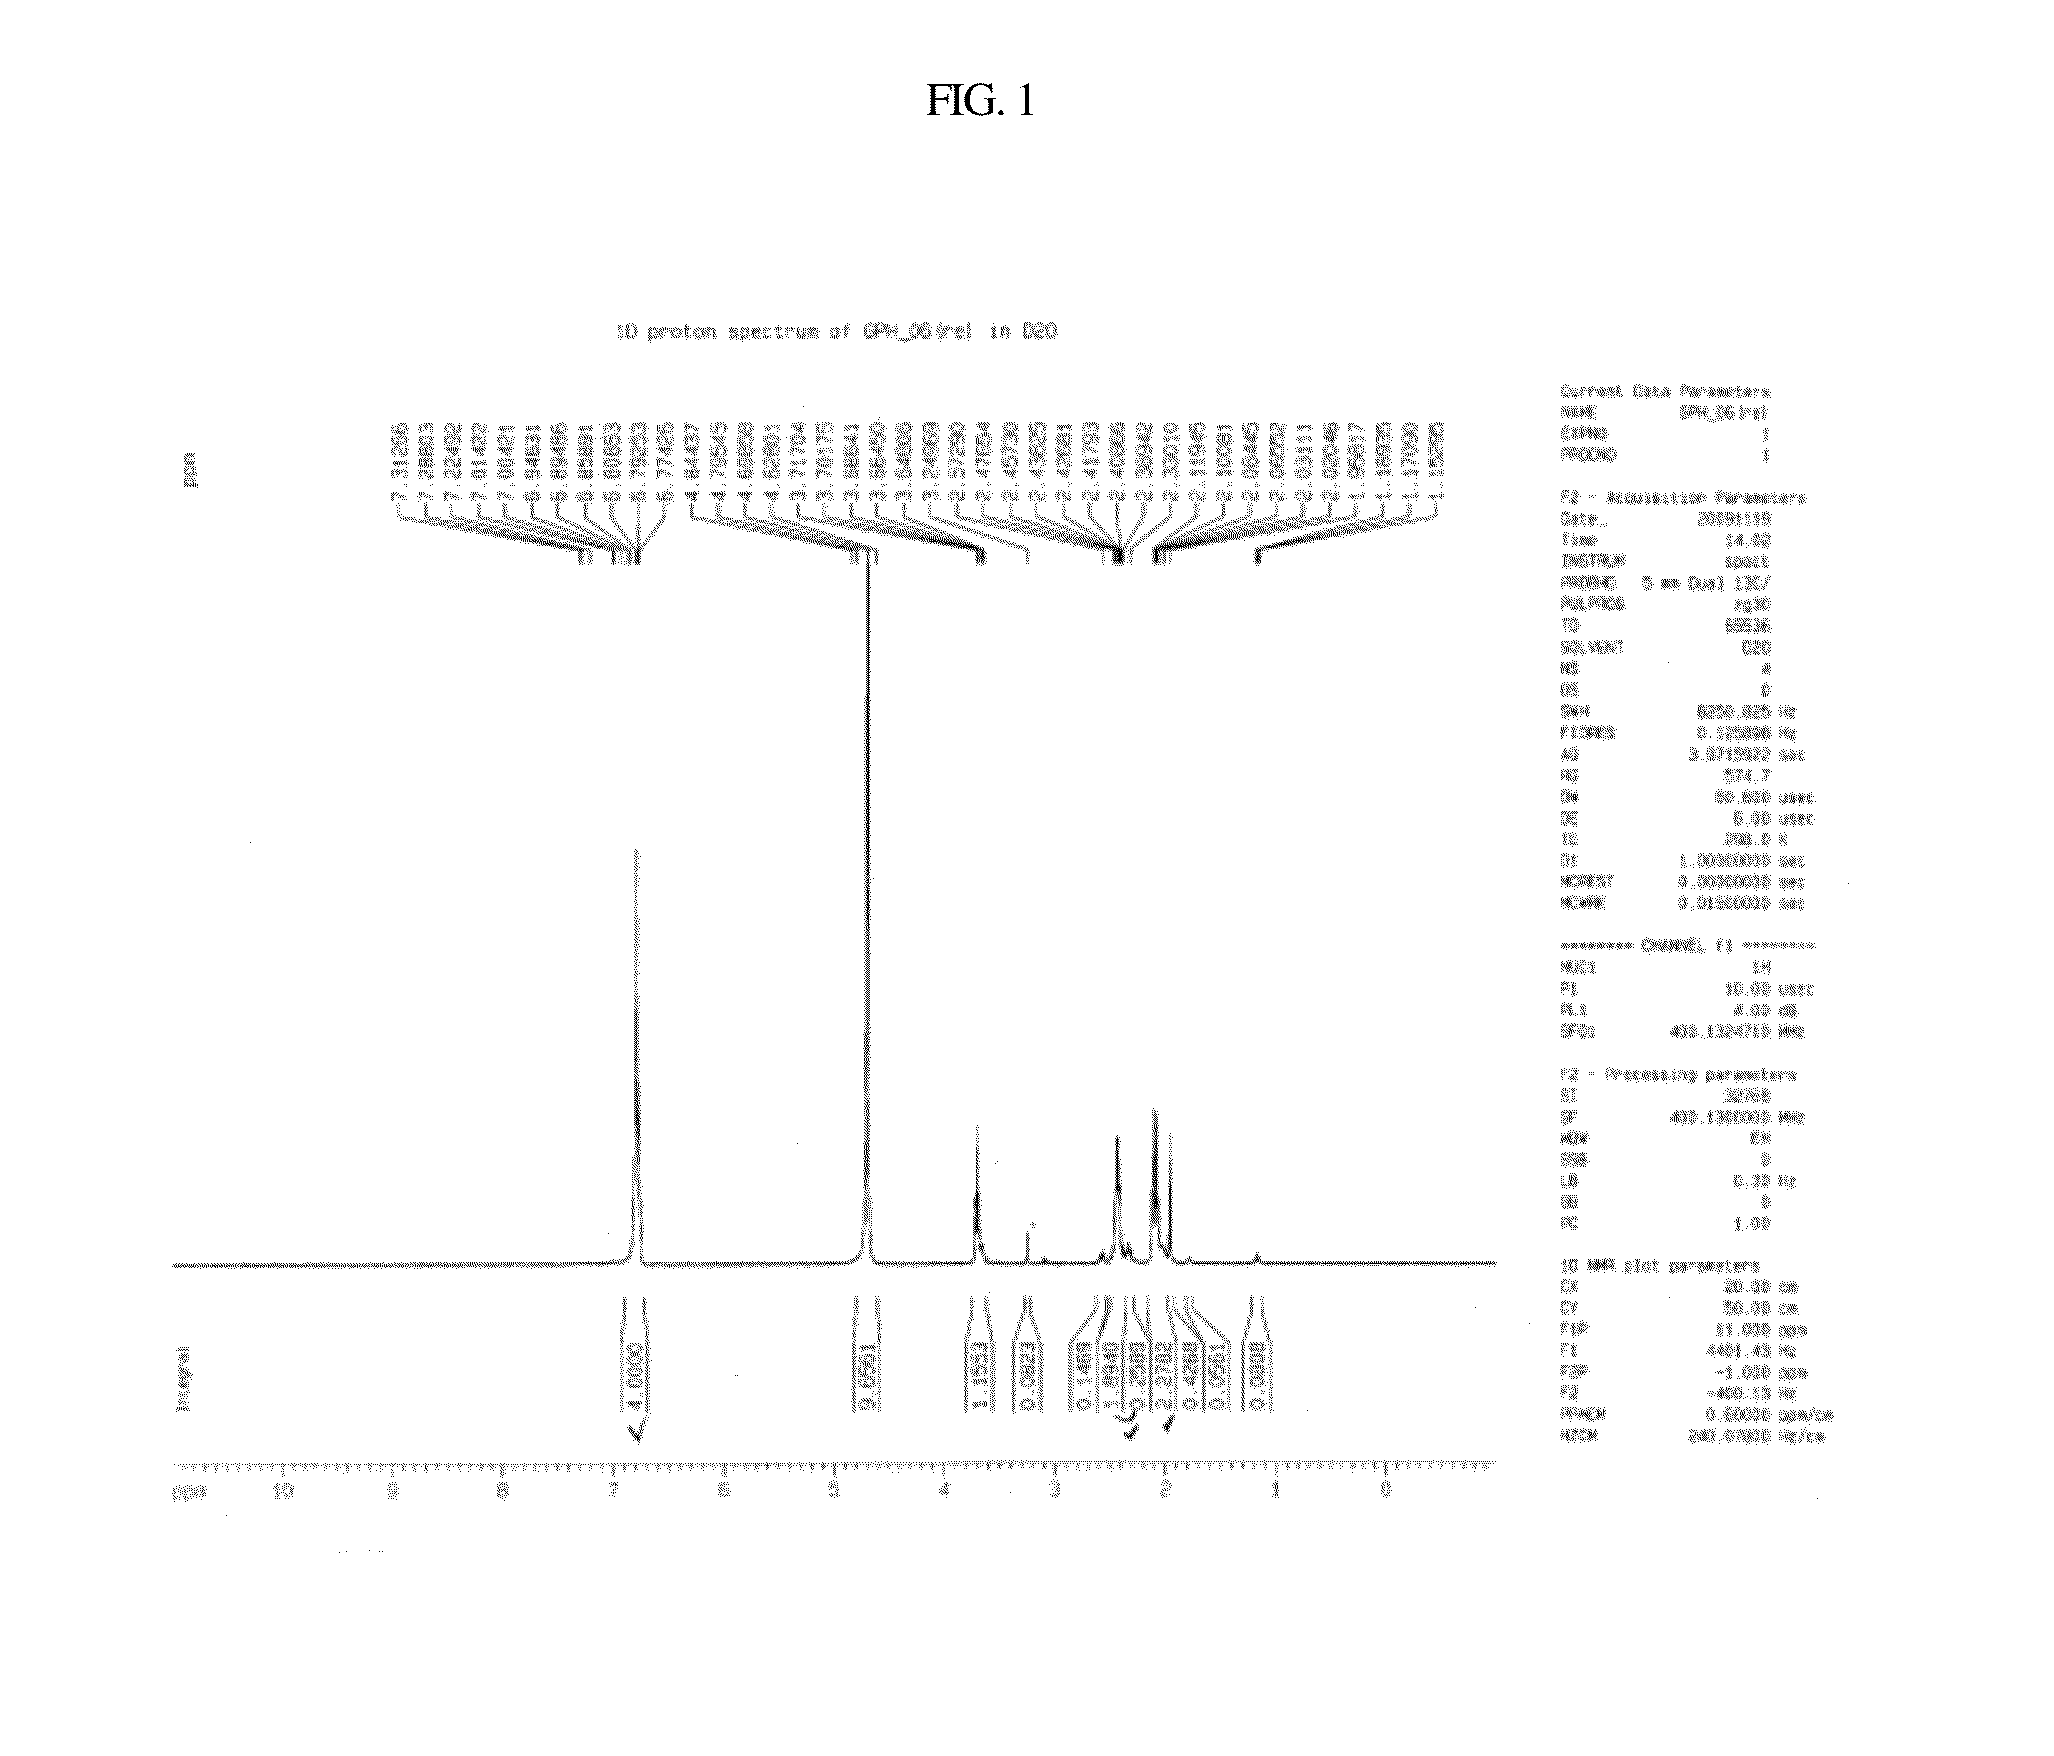 Method for synthesizing ramalin and ramalin precursor by using glutamic acid derivative and hydroxy aniline or hydroxy aniline having protected hydroxy group